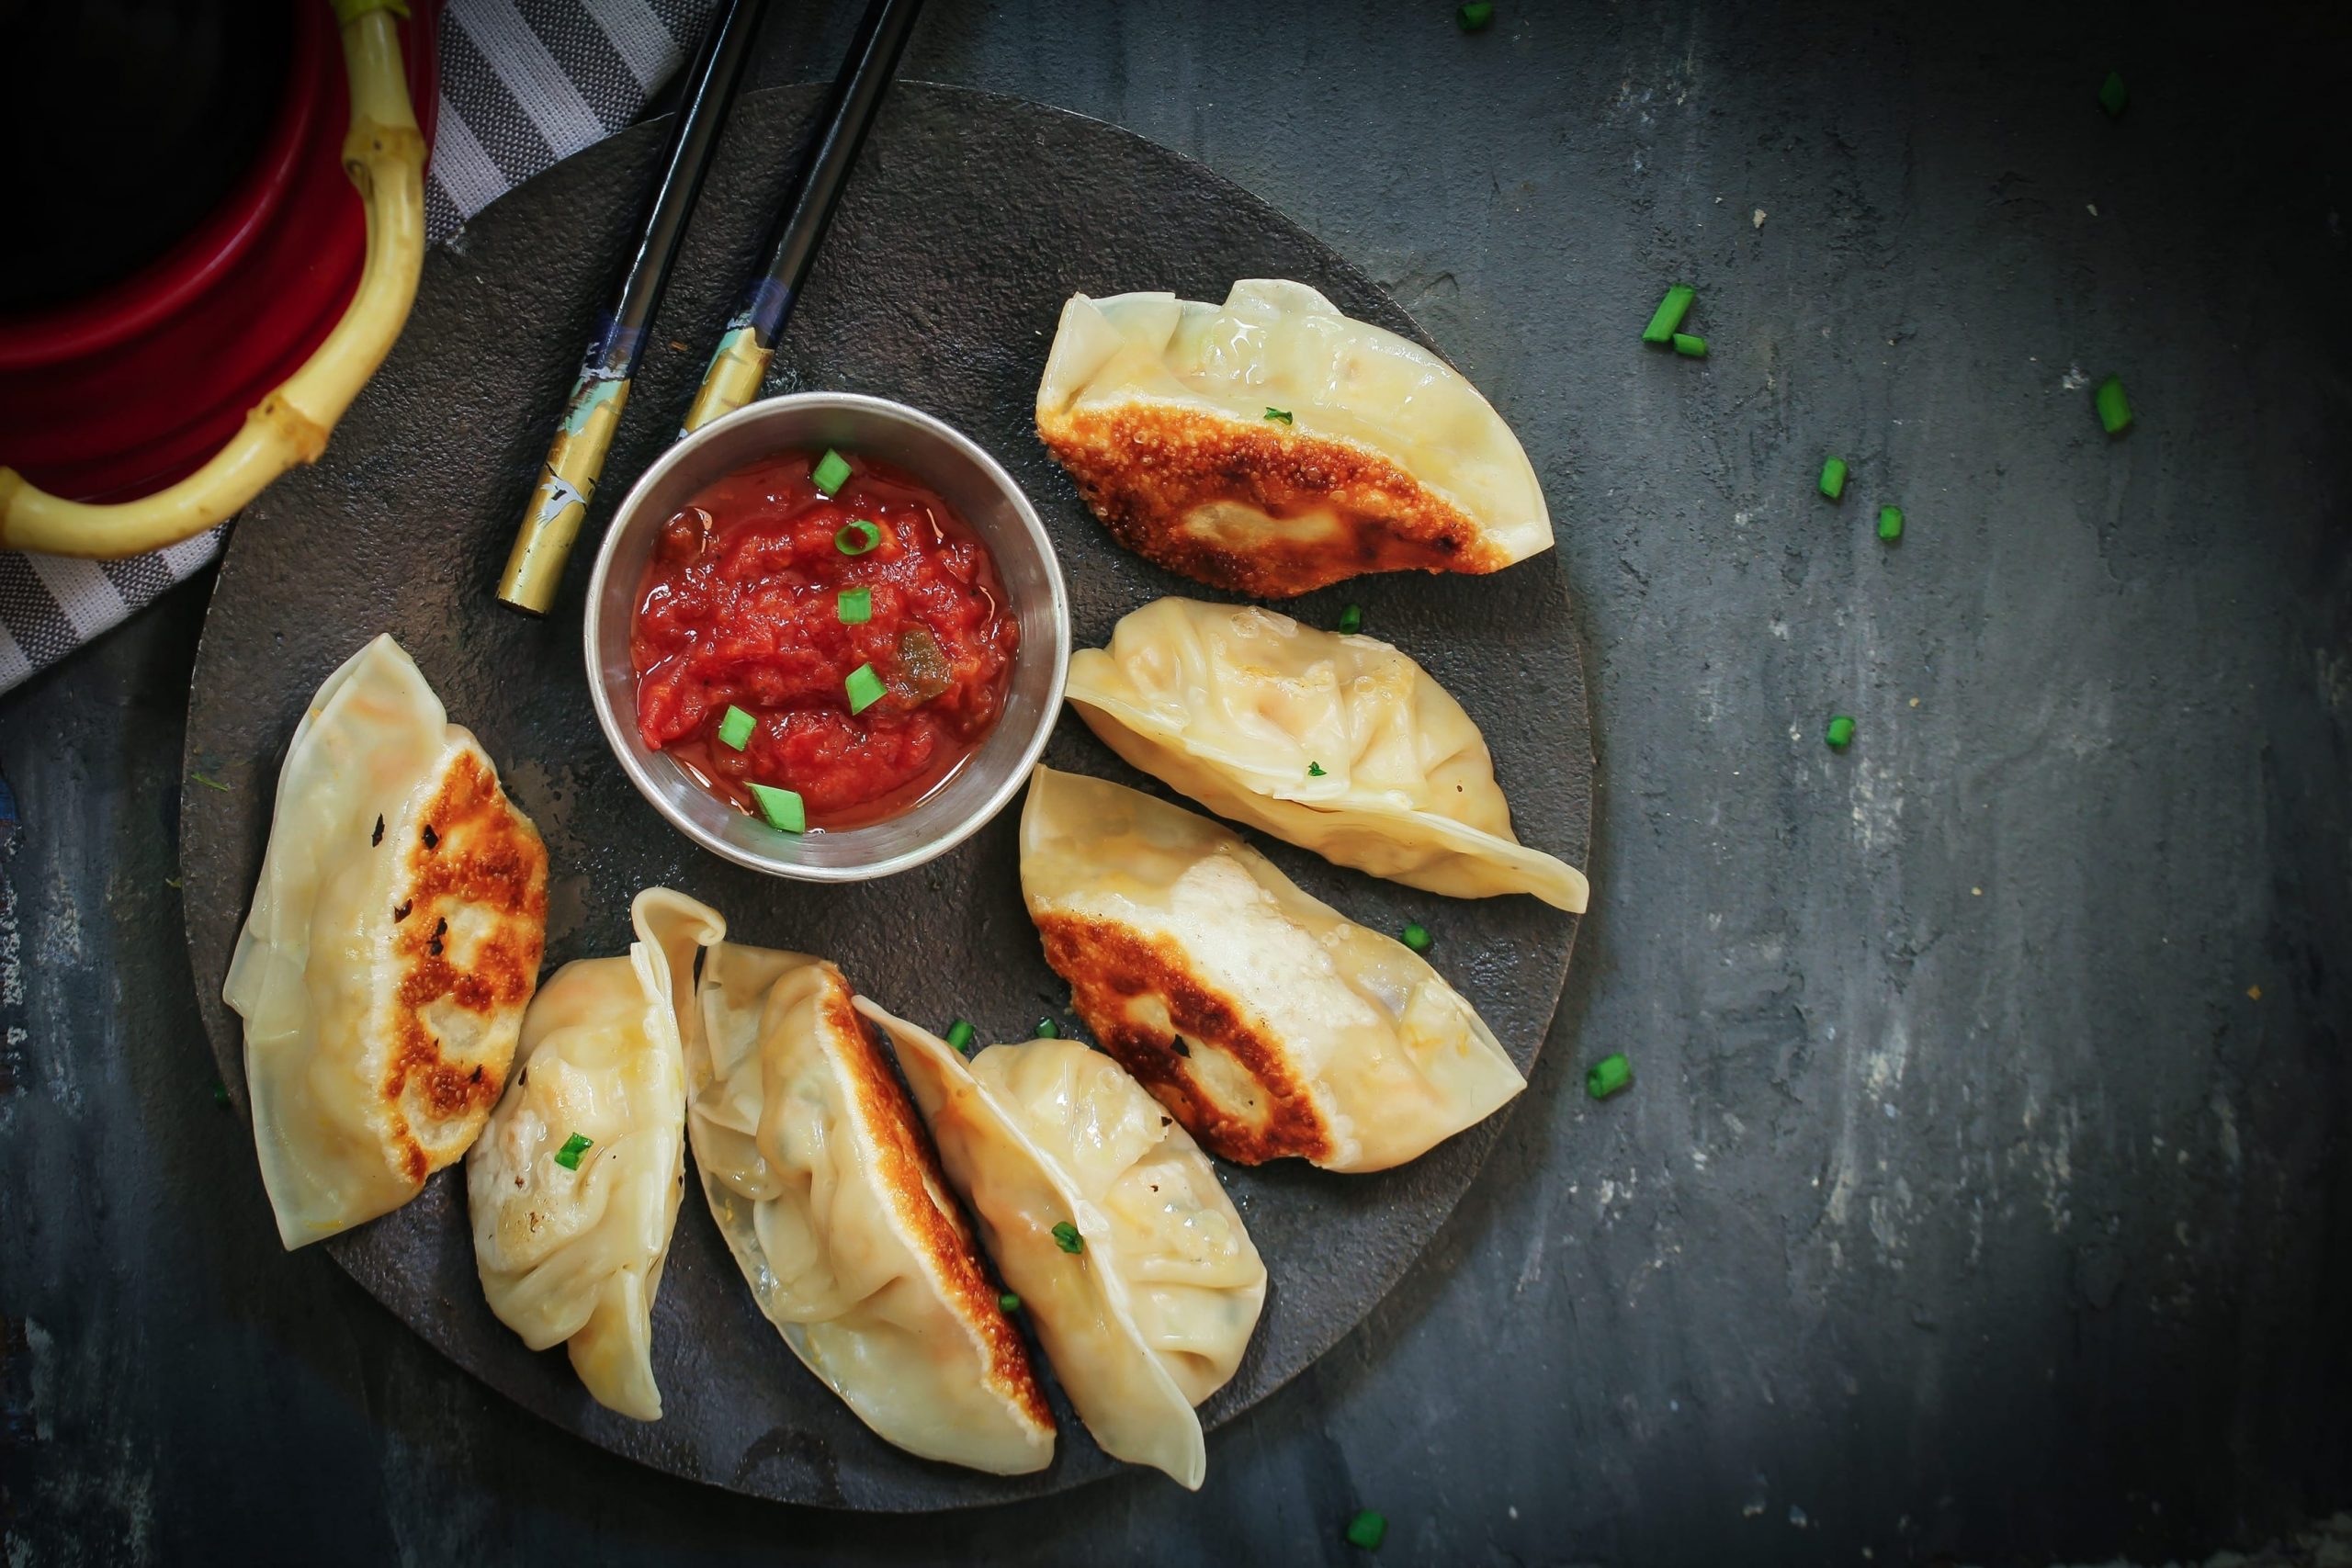 15 Places To Eat The Best Momos in Delhi - My Yellow Plate